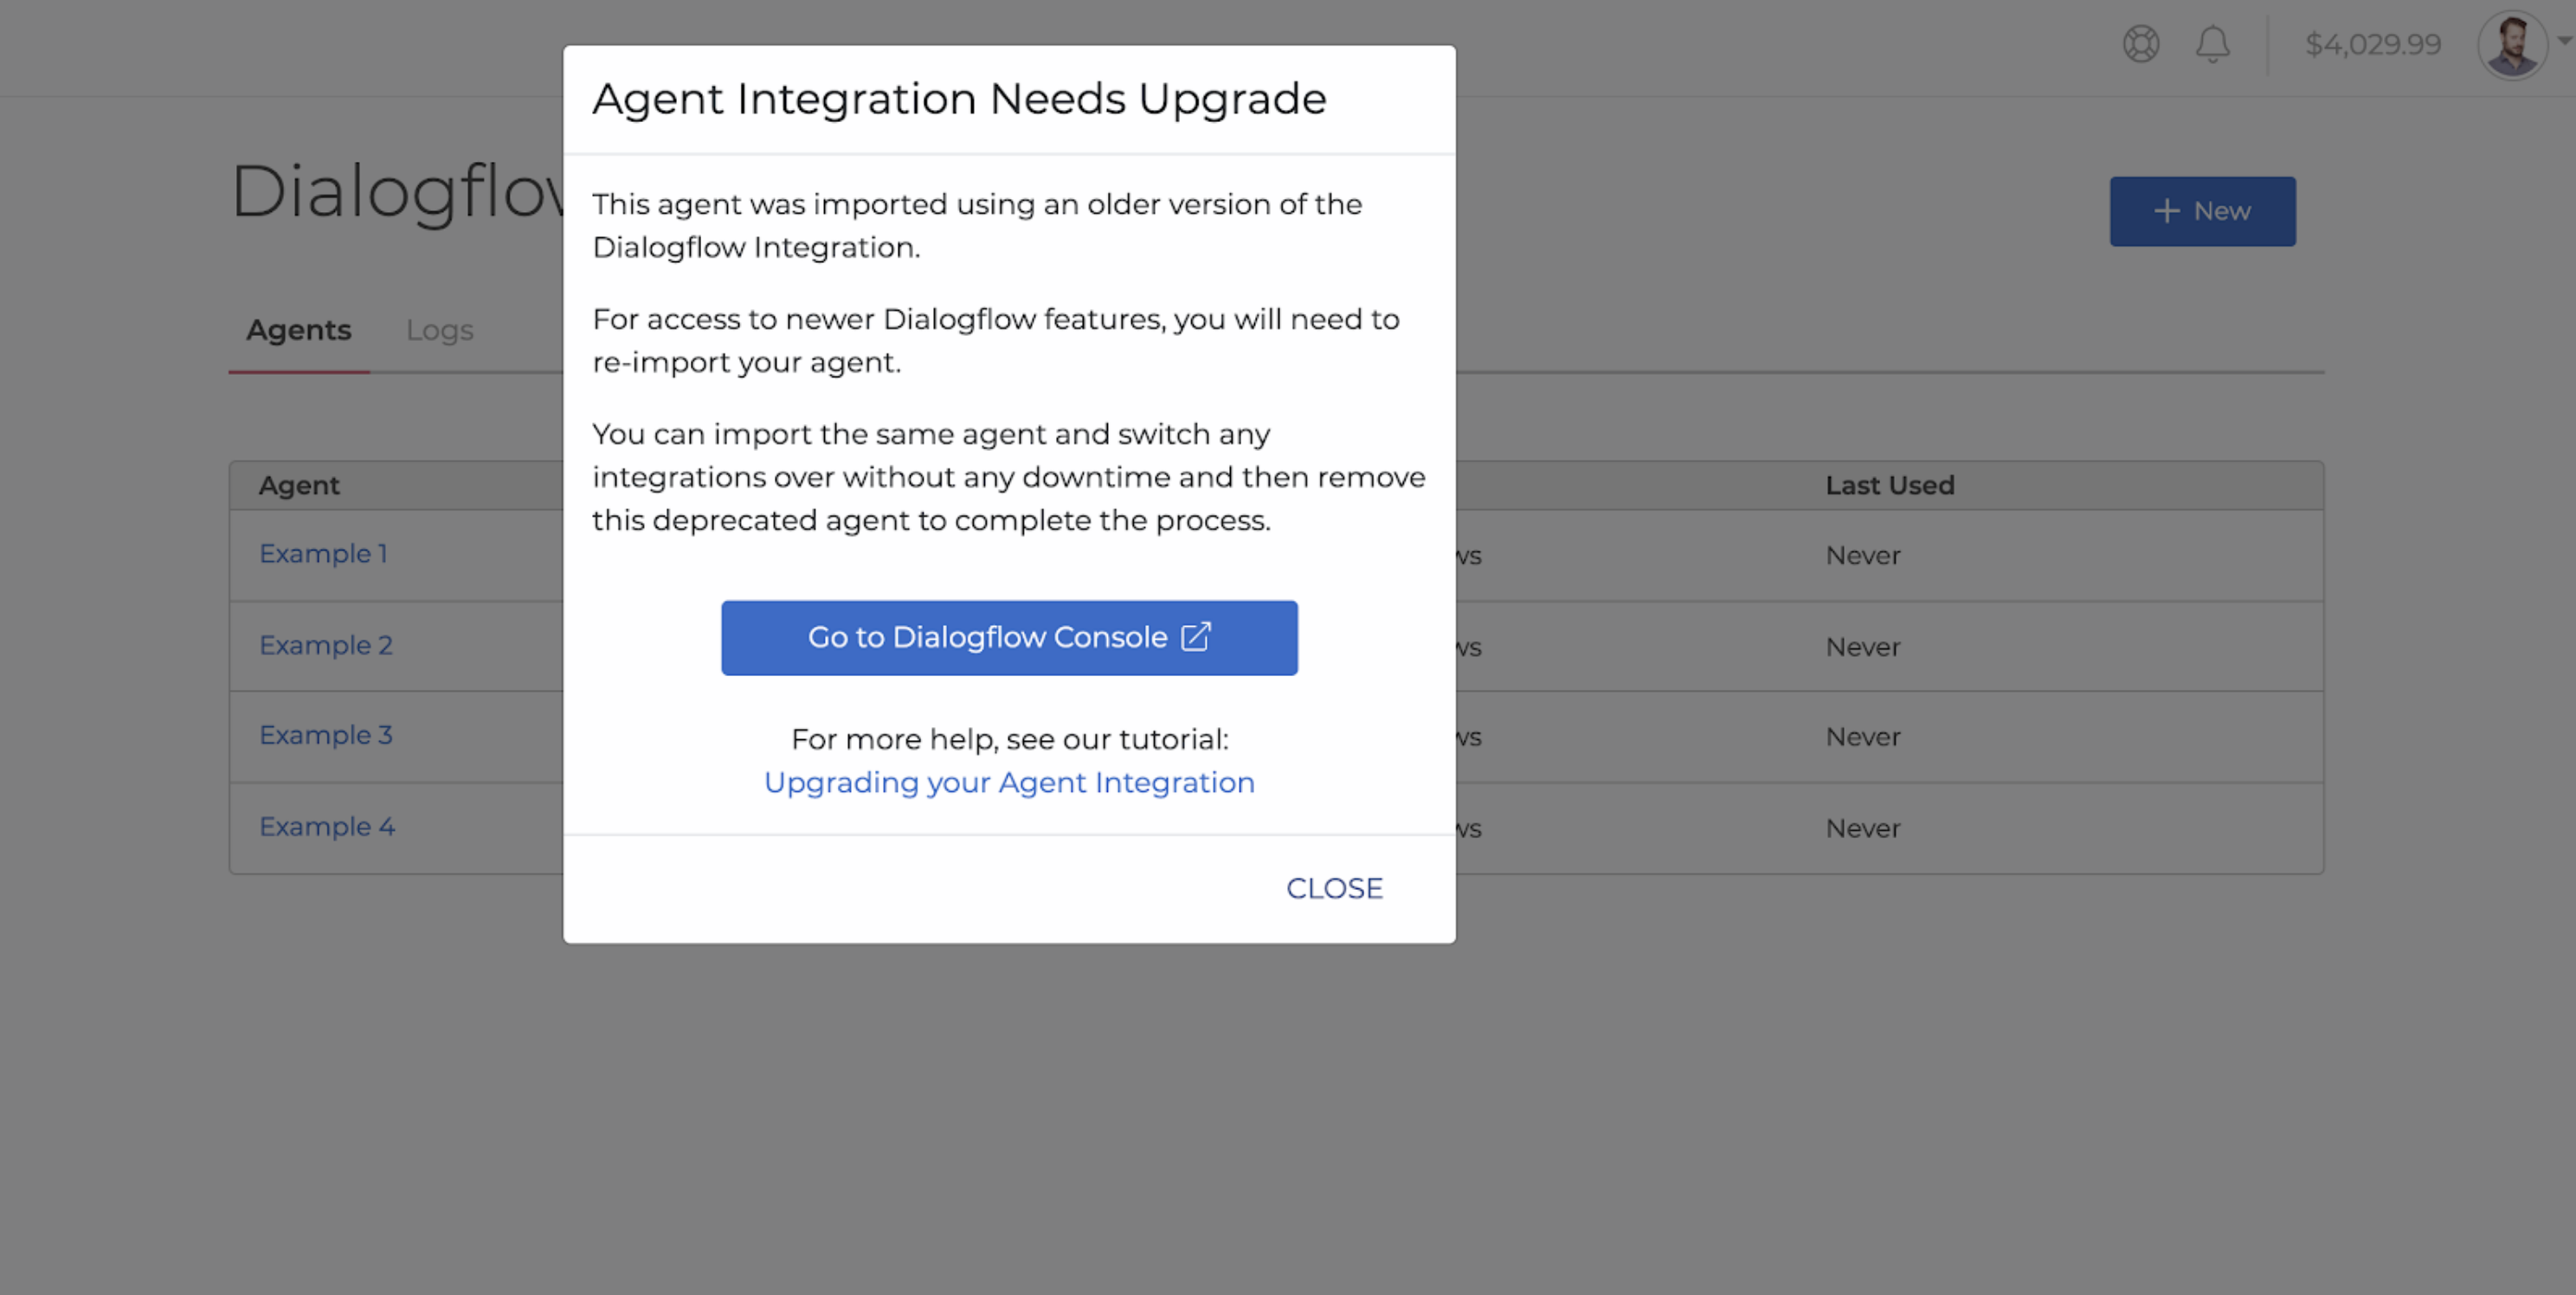 A screenshot of a popup window titled 'Agent Integration Needs Upgrade, with a blue button titled 'Go to Dialogflow Console'.